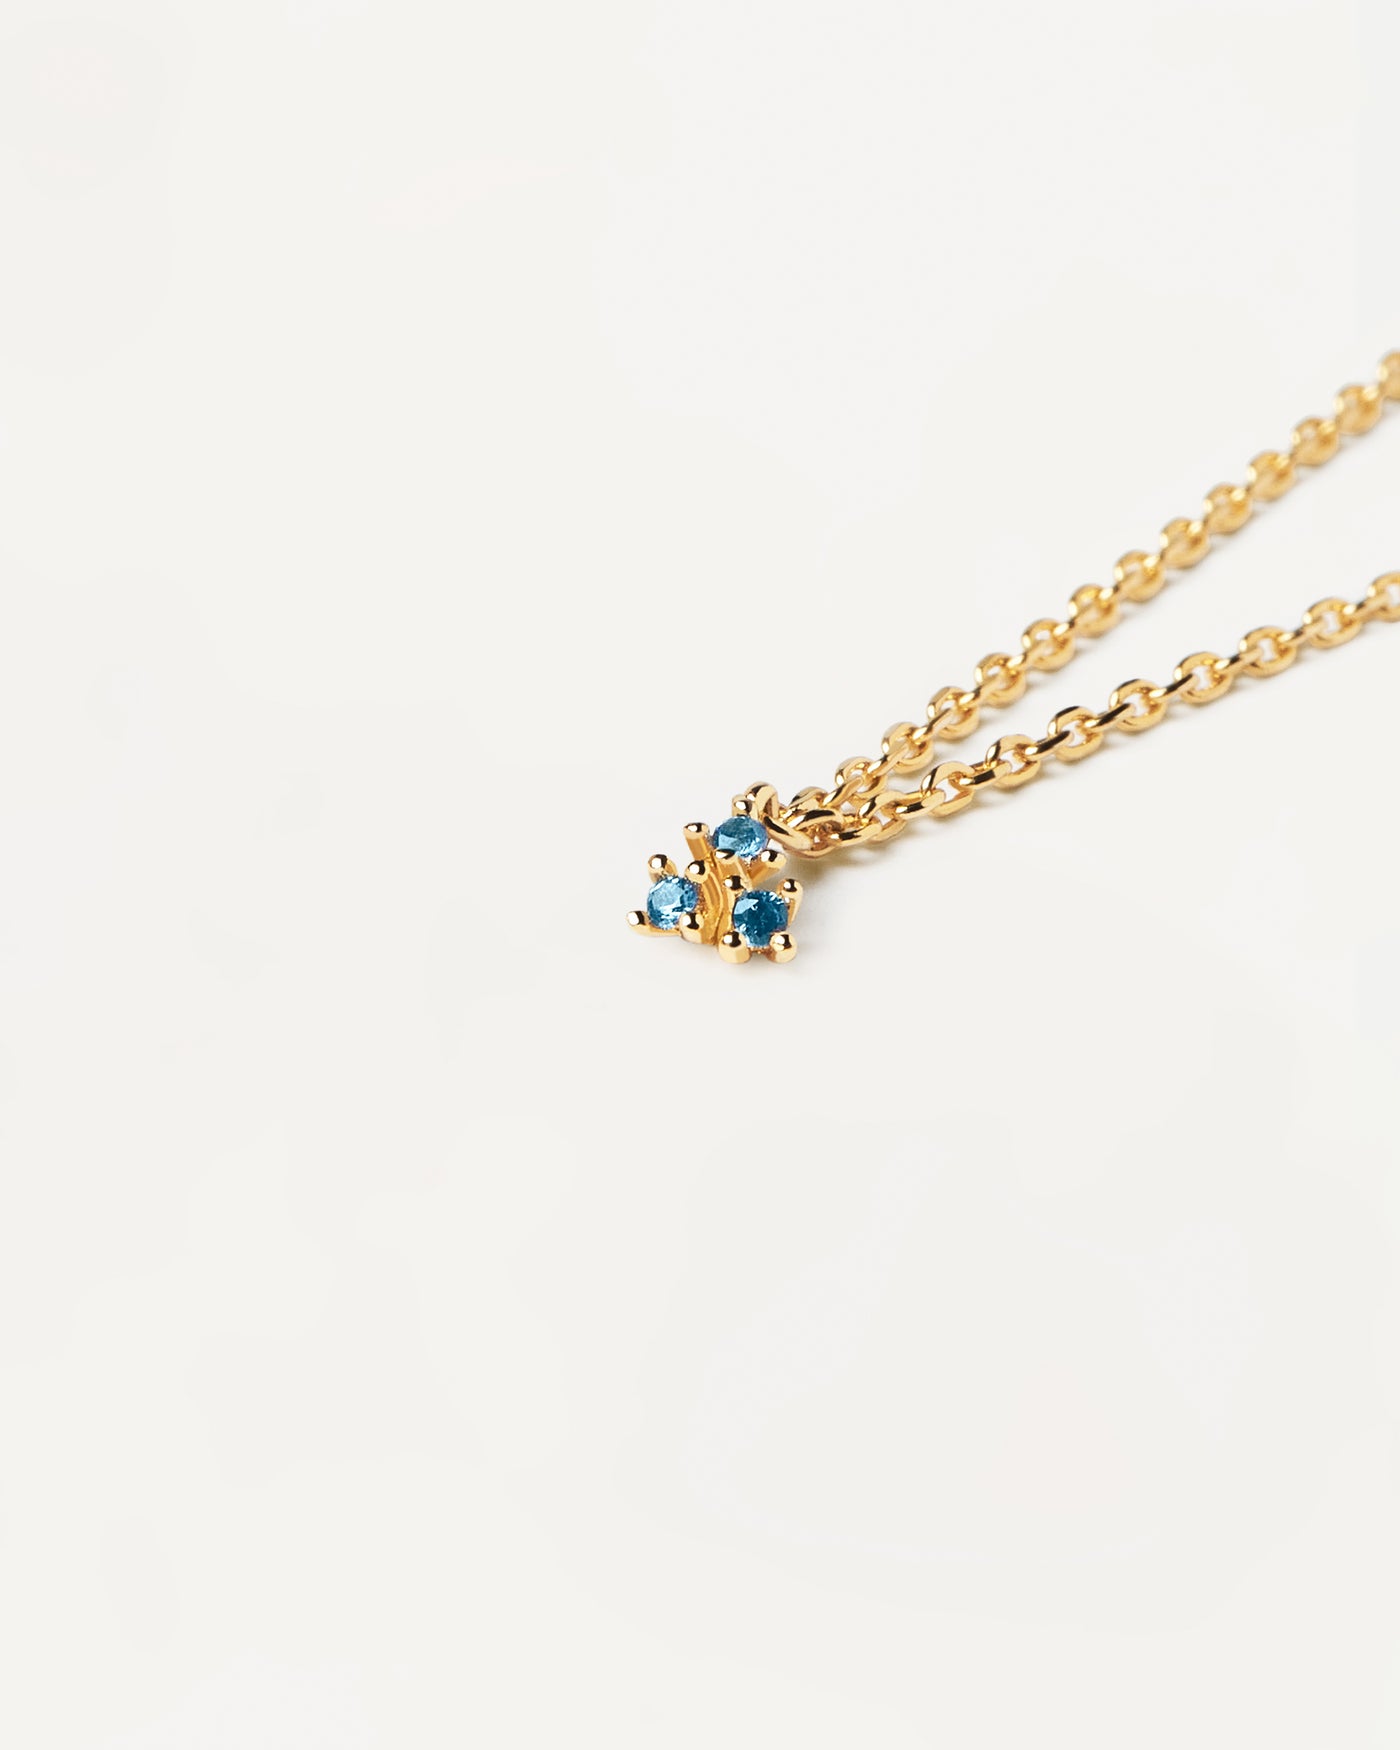 Daisy Gold Necklace - 925 sterling silver / 18K gold plating